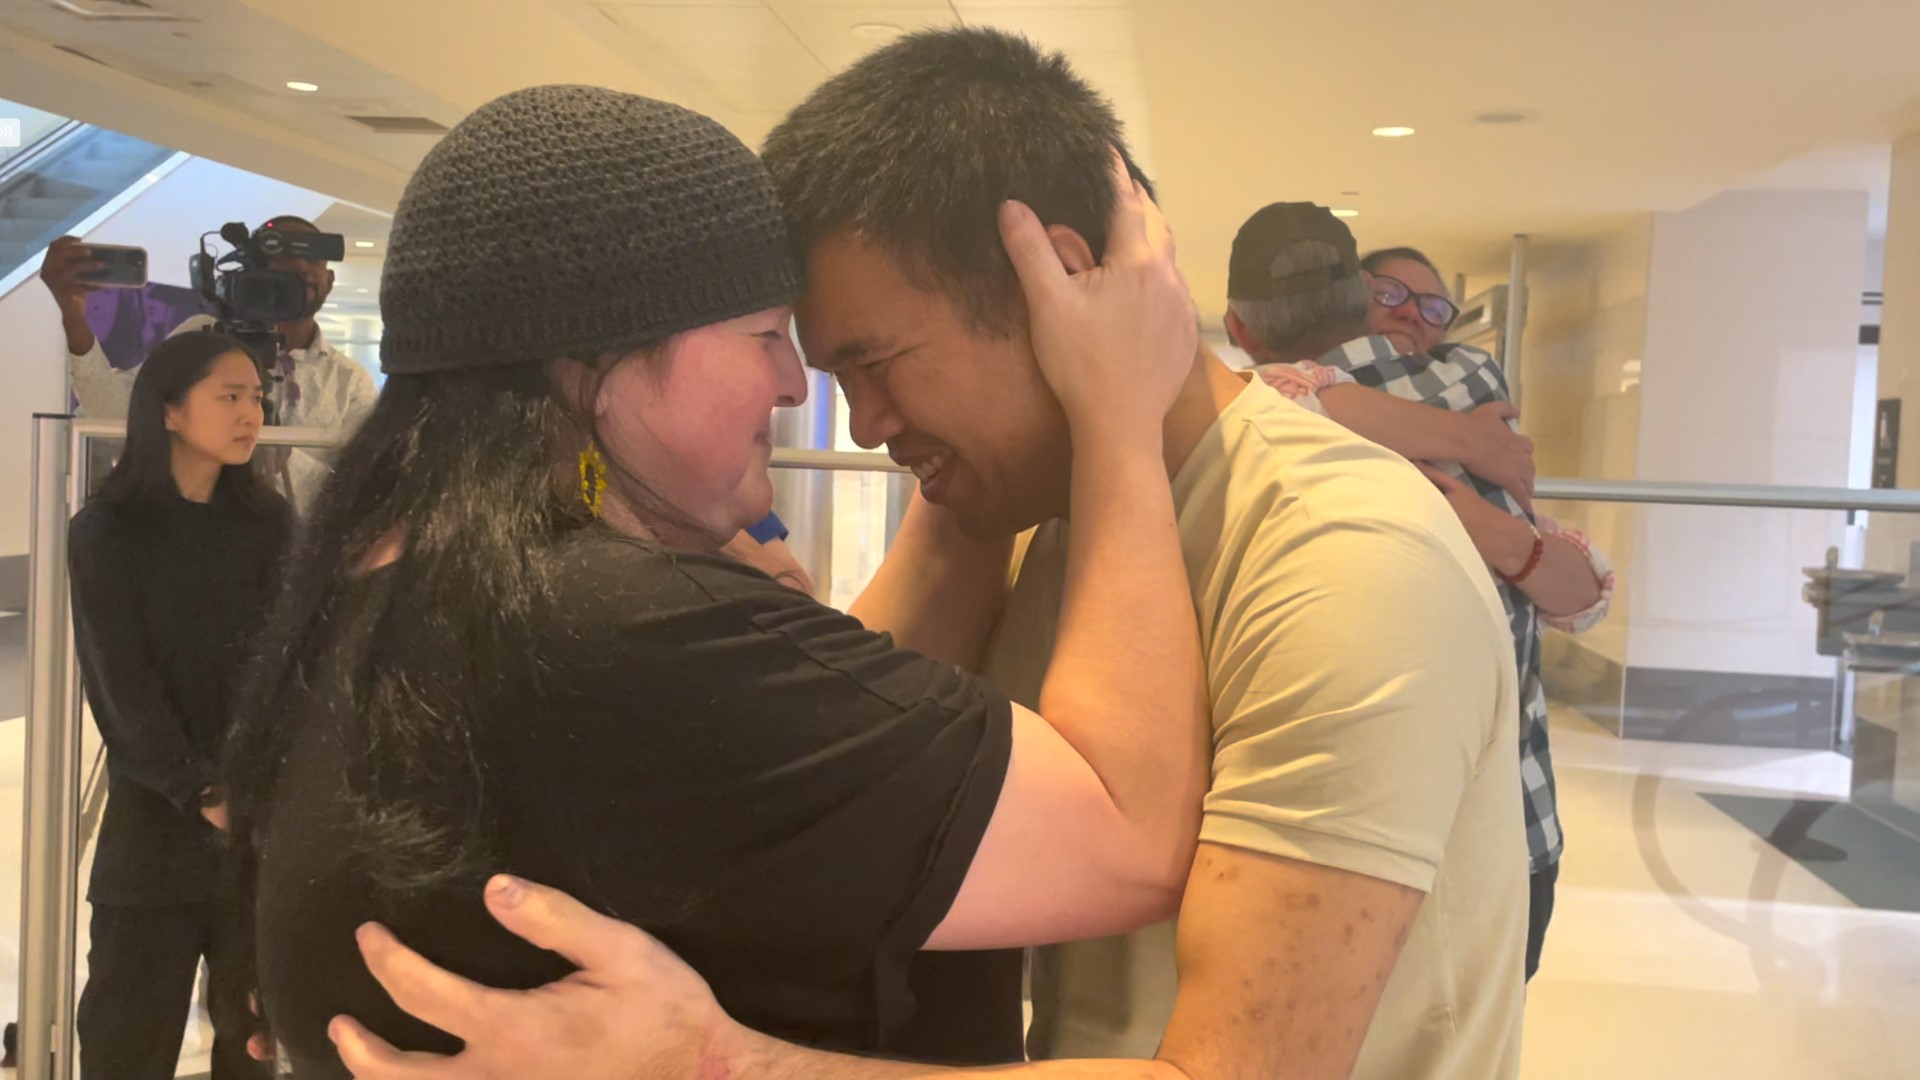 The two had an emotional reunion with their families this weekend after being released by Russian-backed separatists as part of a prisoner exchange.